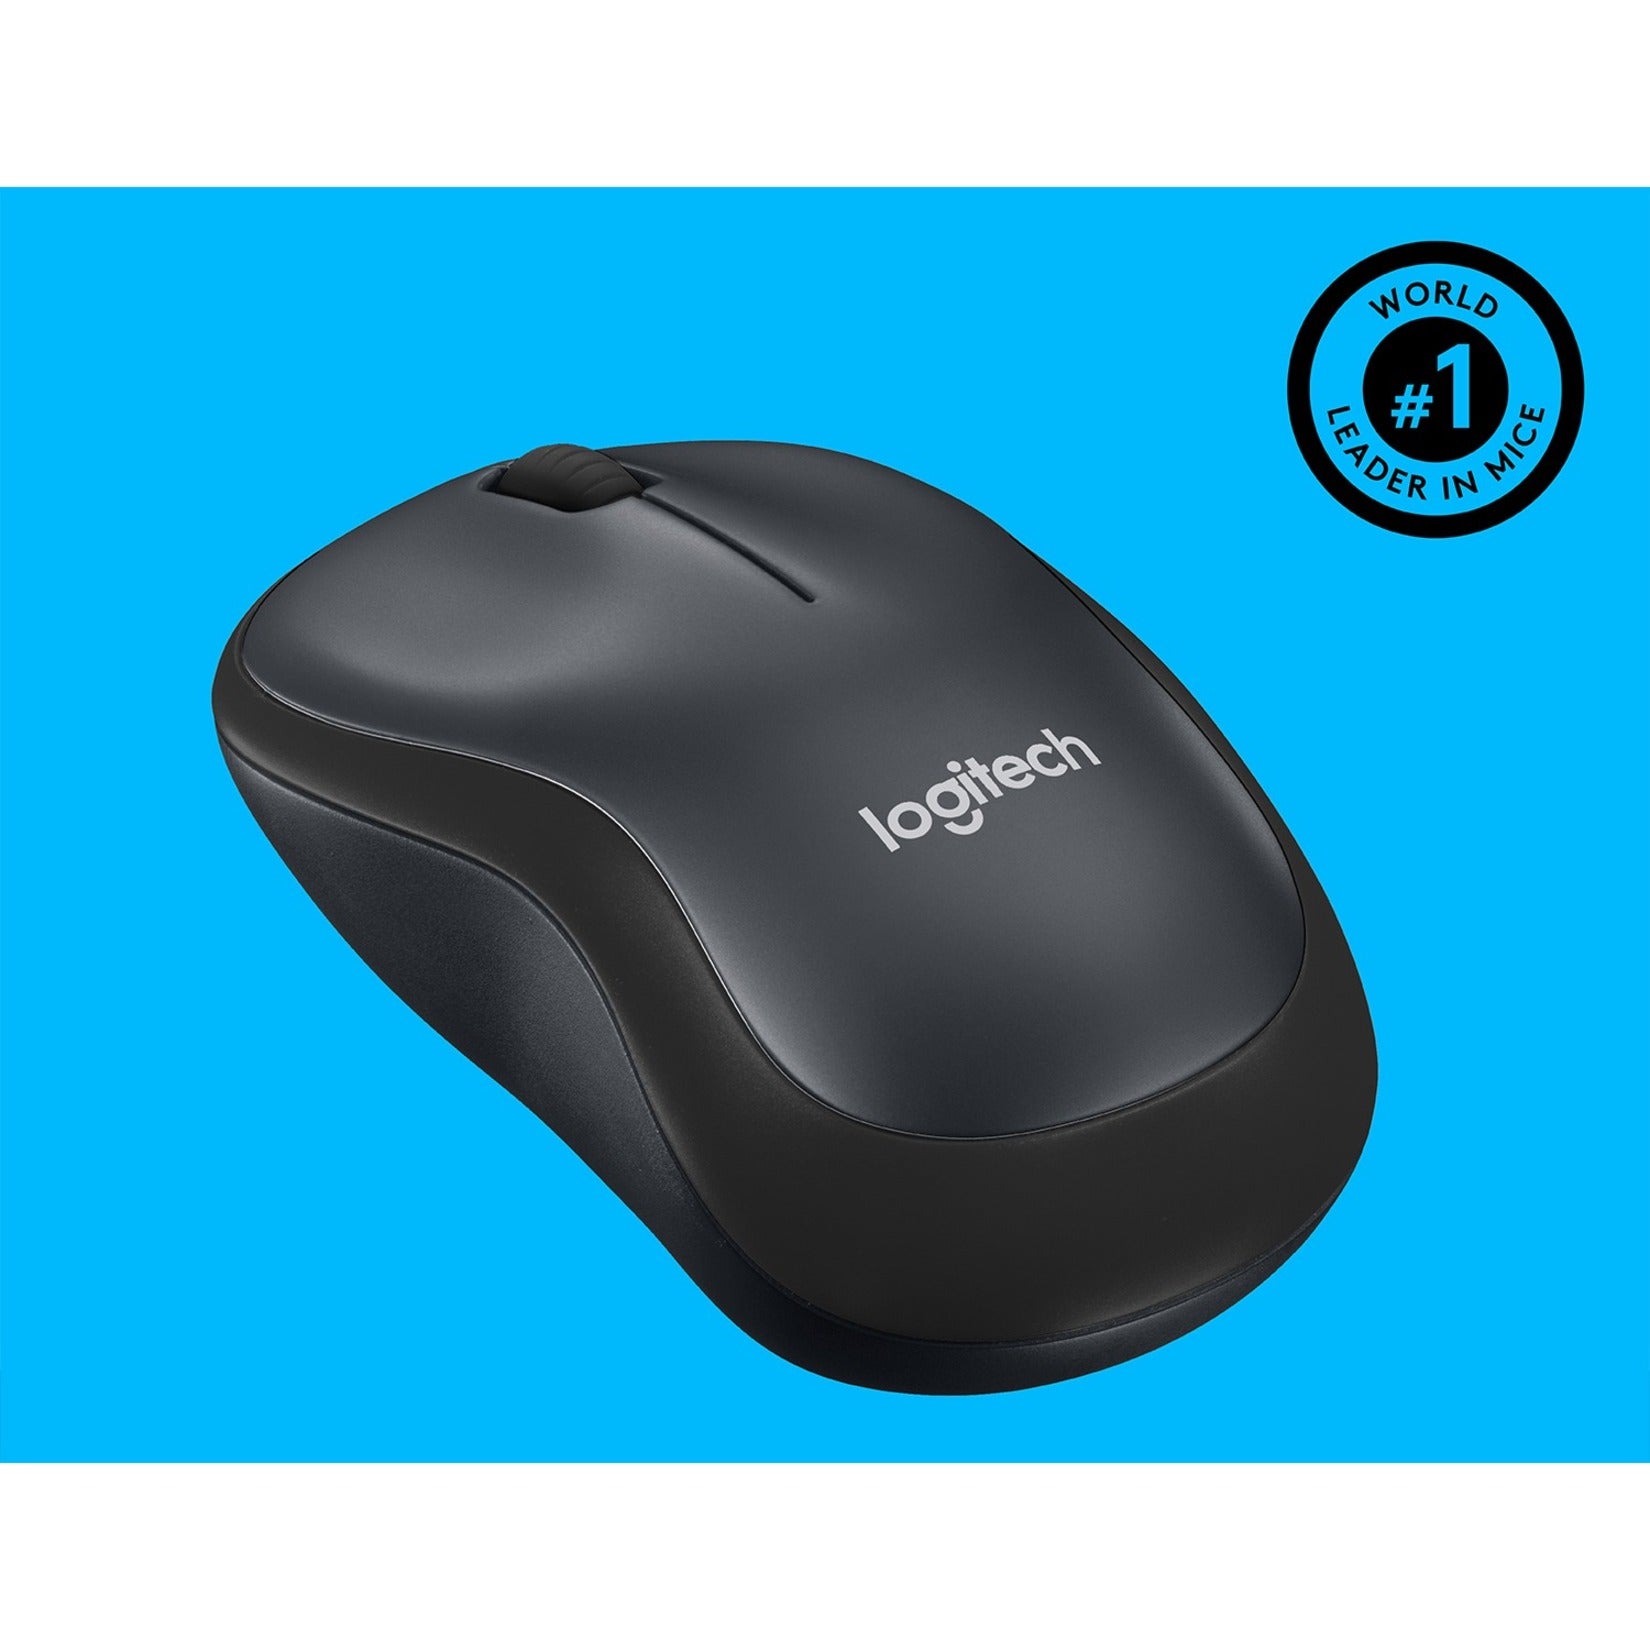 Logitech 910-006127 M220 Silent Wireless Mouse, 2.4 GHz with USB Receiver, 1000 DPI Optical Tracking, 18-Month Battery